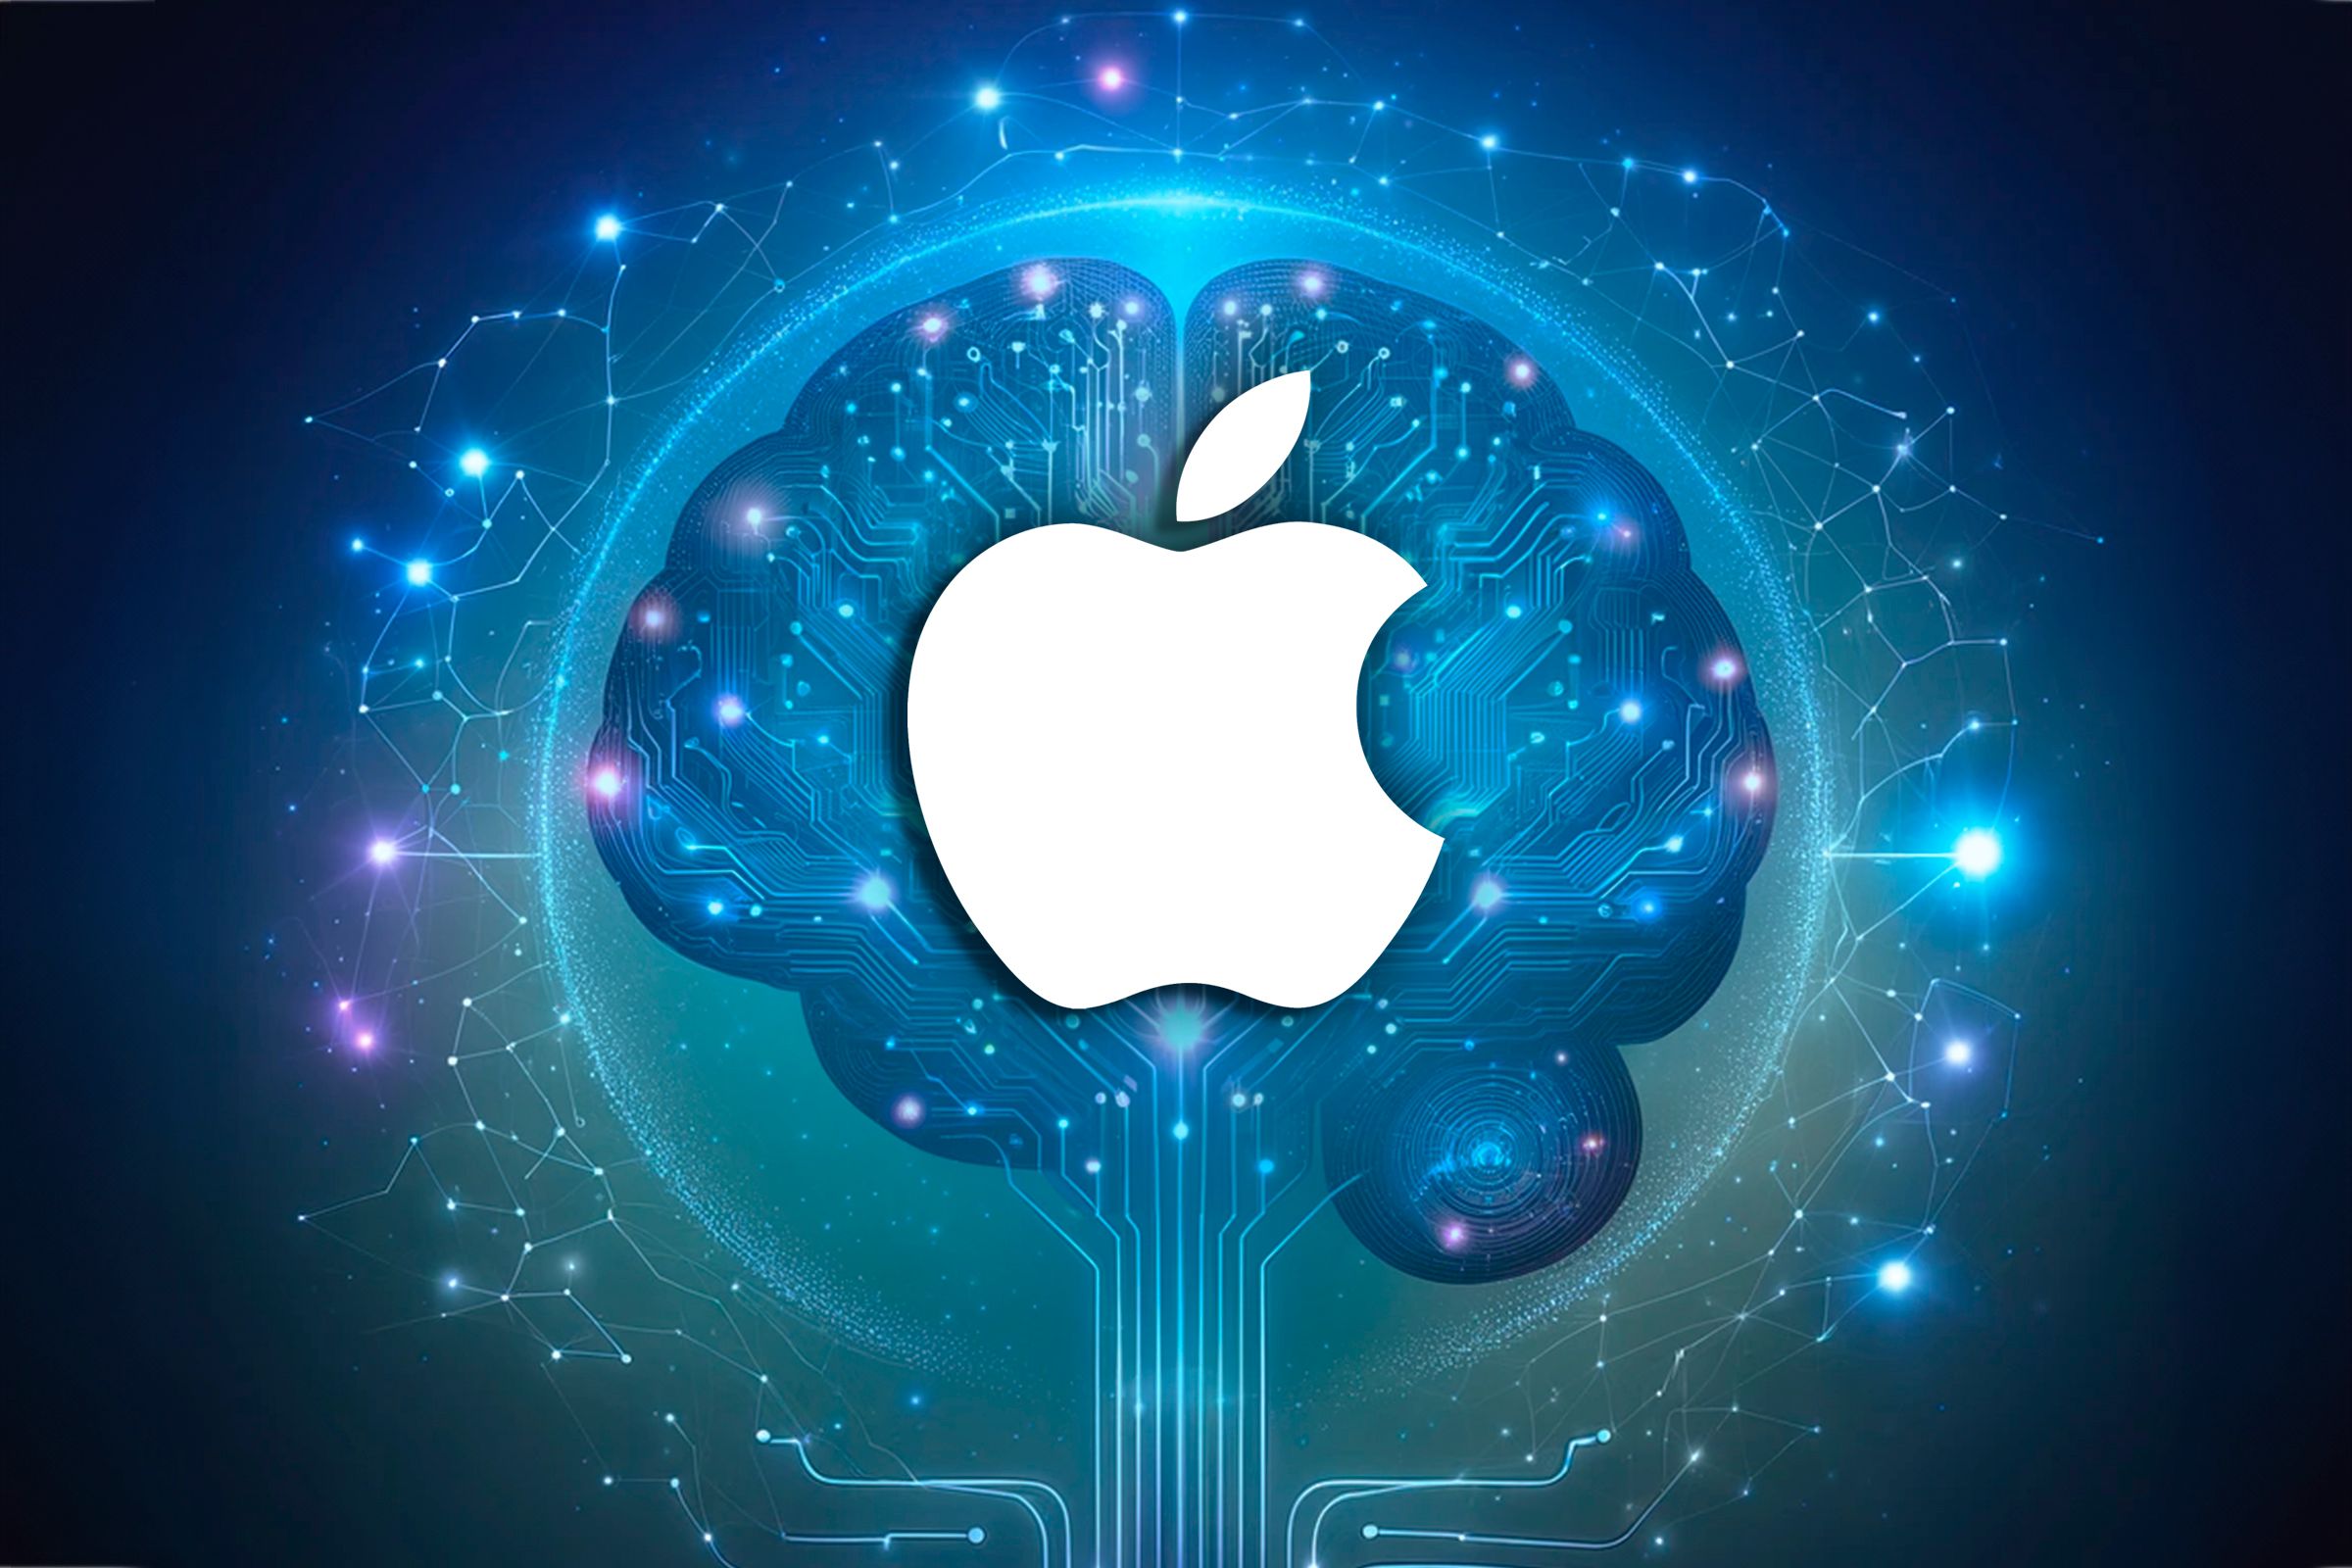 Apple logo in the center and a brain with several connections in the background.